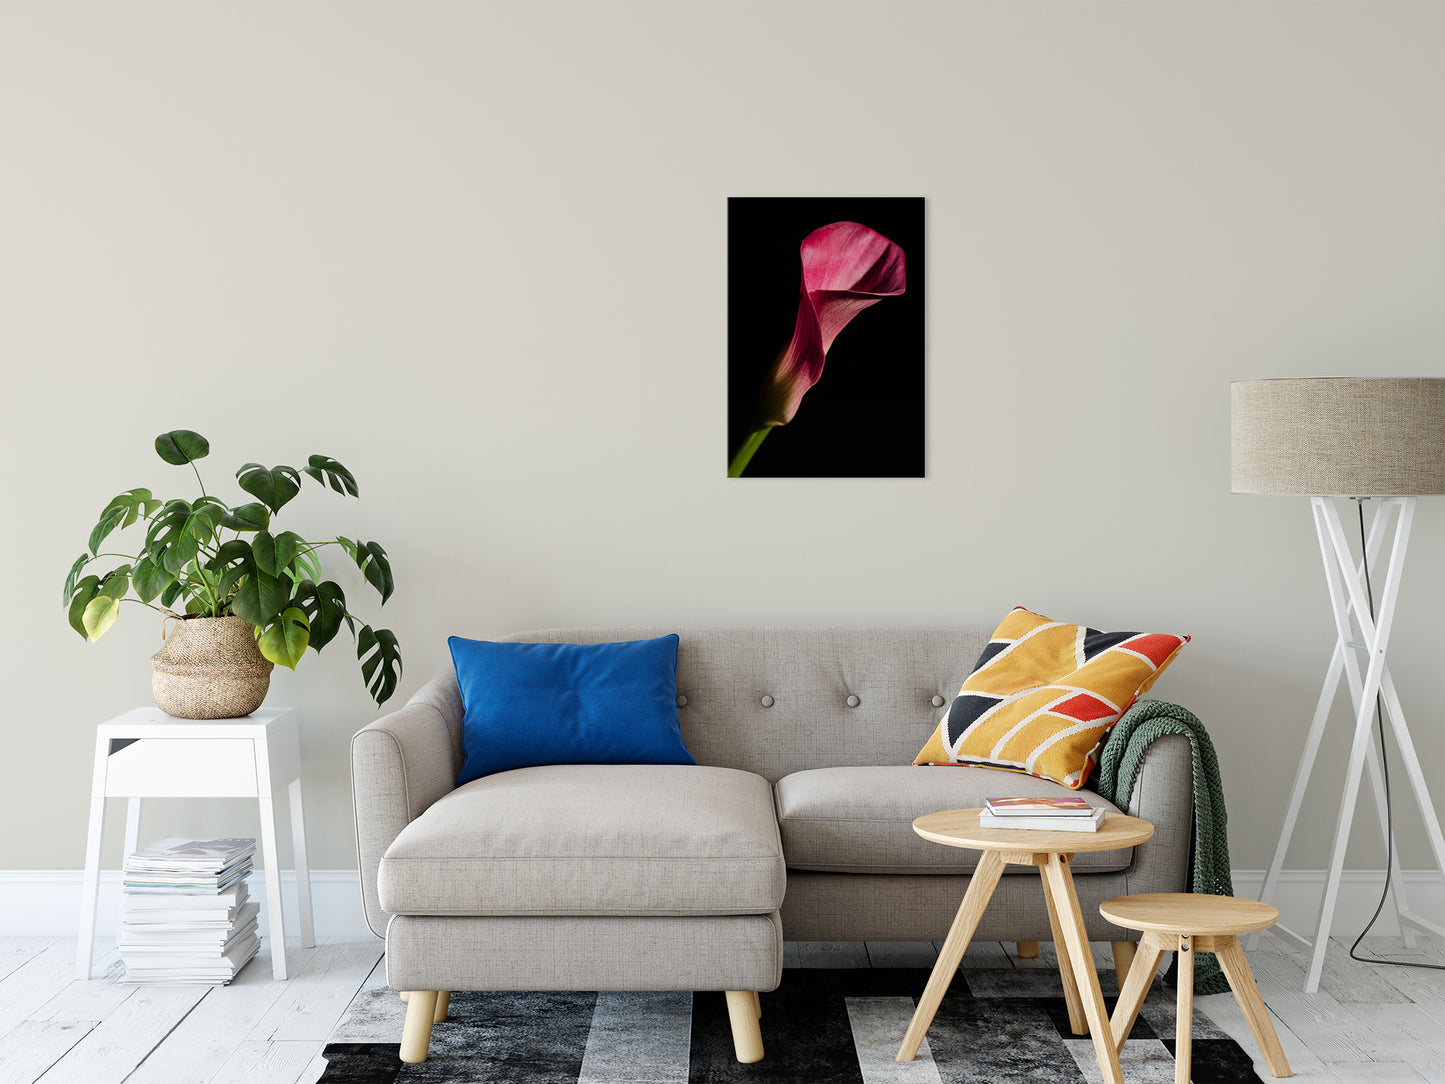 Pink Calla Lily Flower on Black Nature / Floral Photo Fine Art Canvas Wall Art Prints 20" x 24" - PIPAFINEART